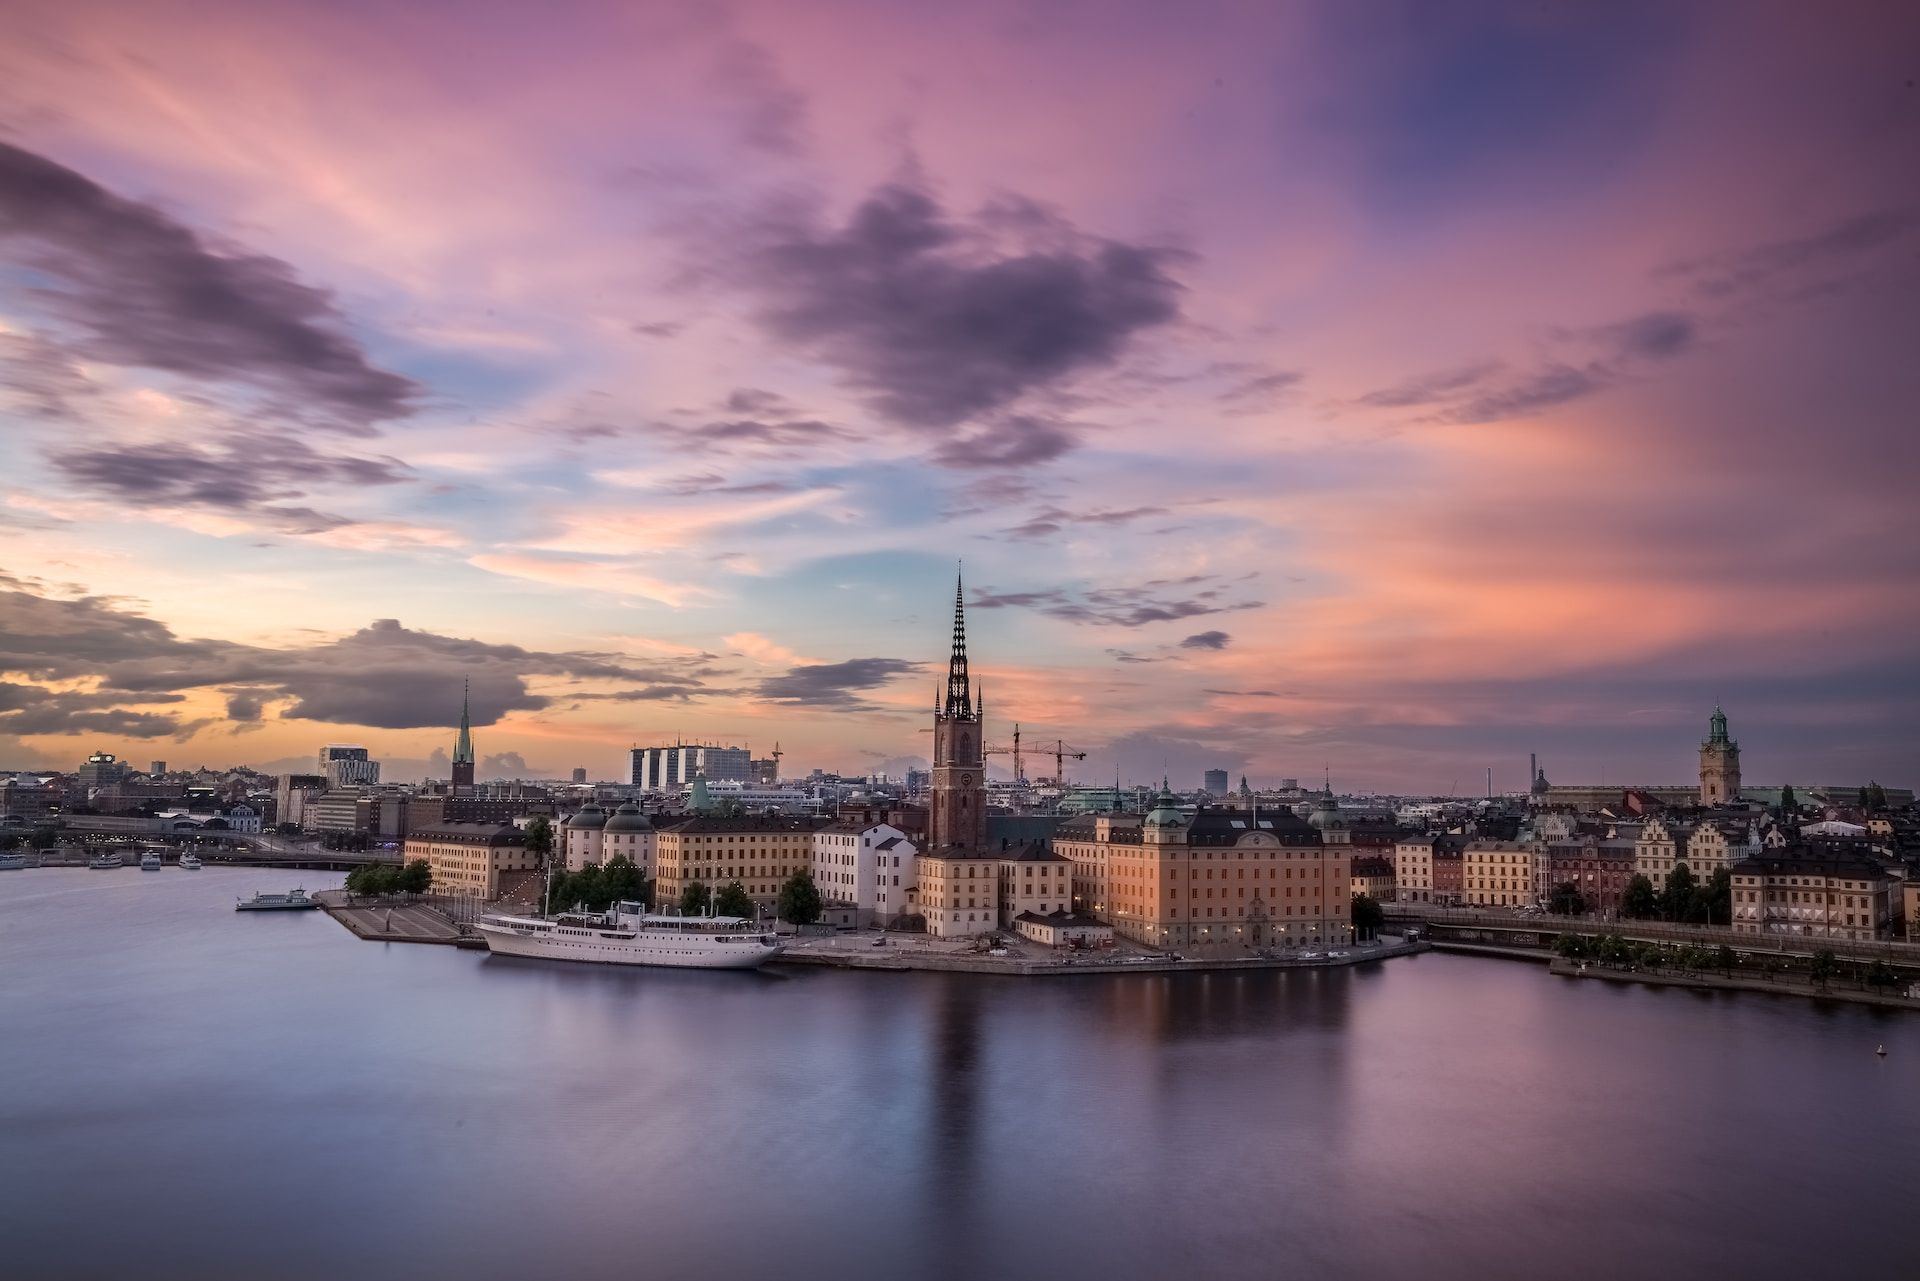 Beautiful pink and purple skies over Stockholm, Sweden.